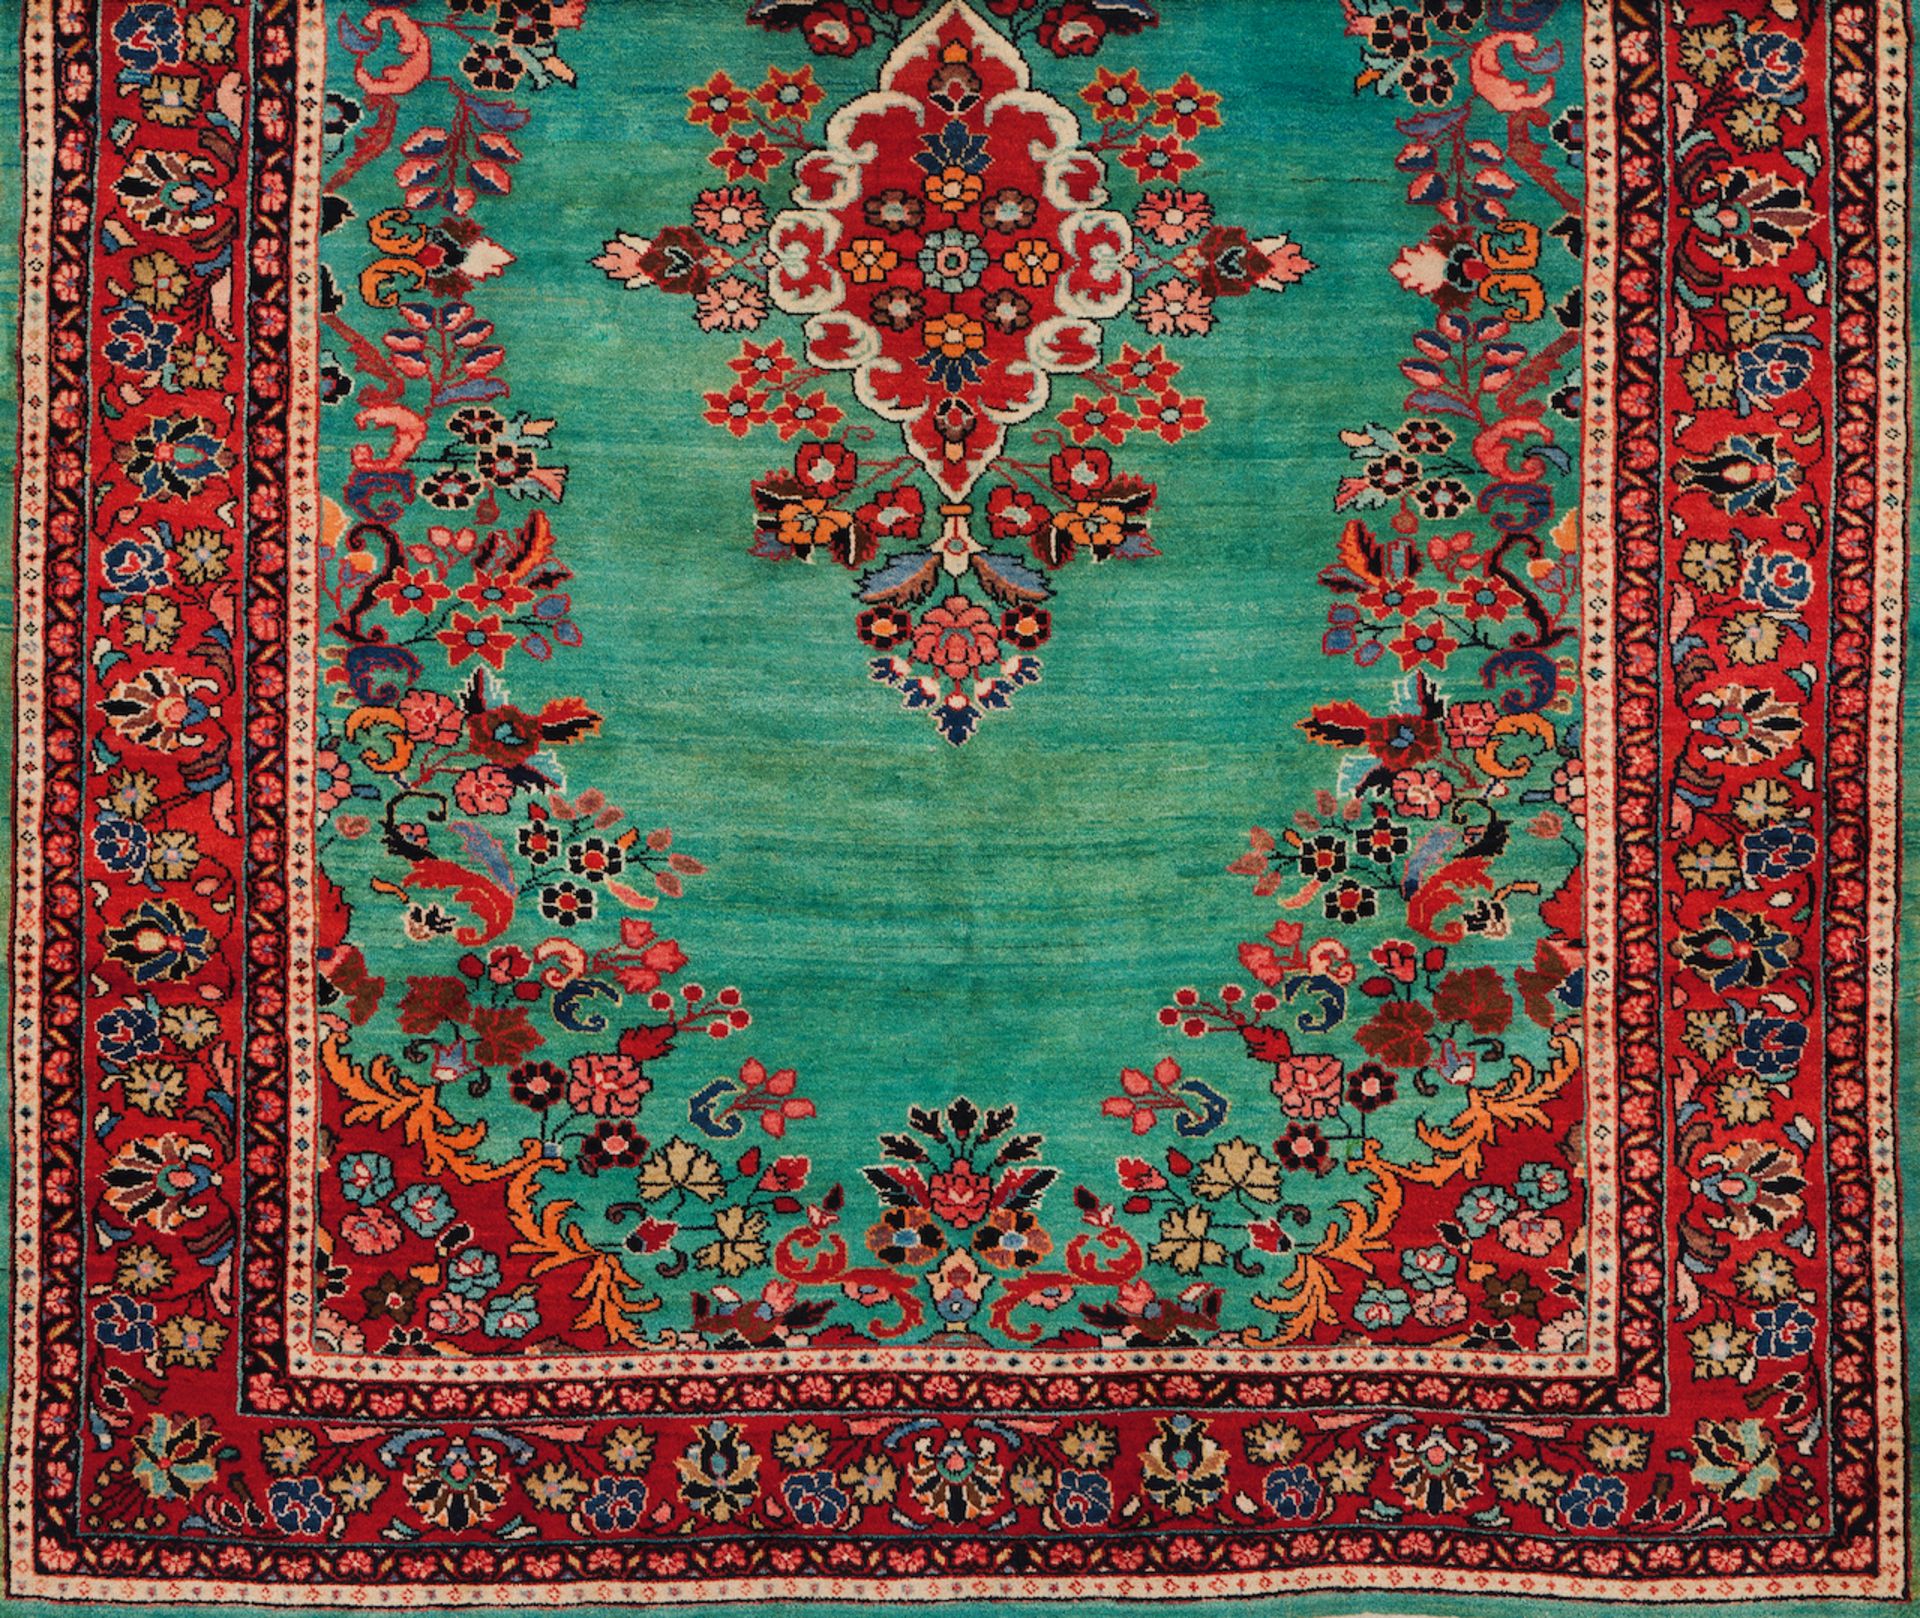 A Sarouk rug, IranWool and cotton of floral design in bordeaux, beige and turquoise blue300x210 cm